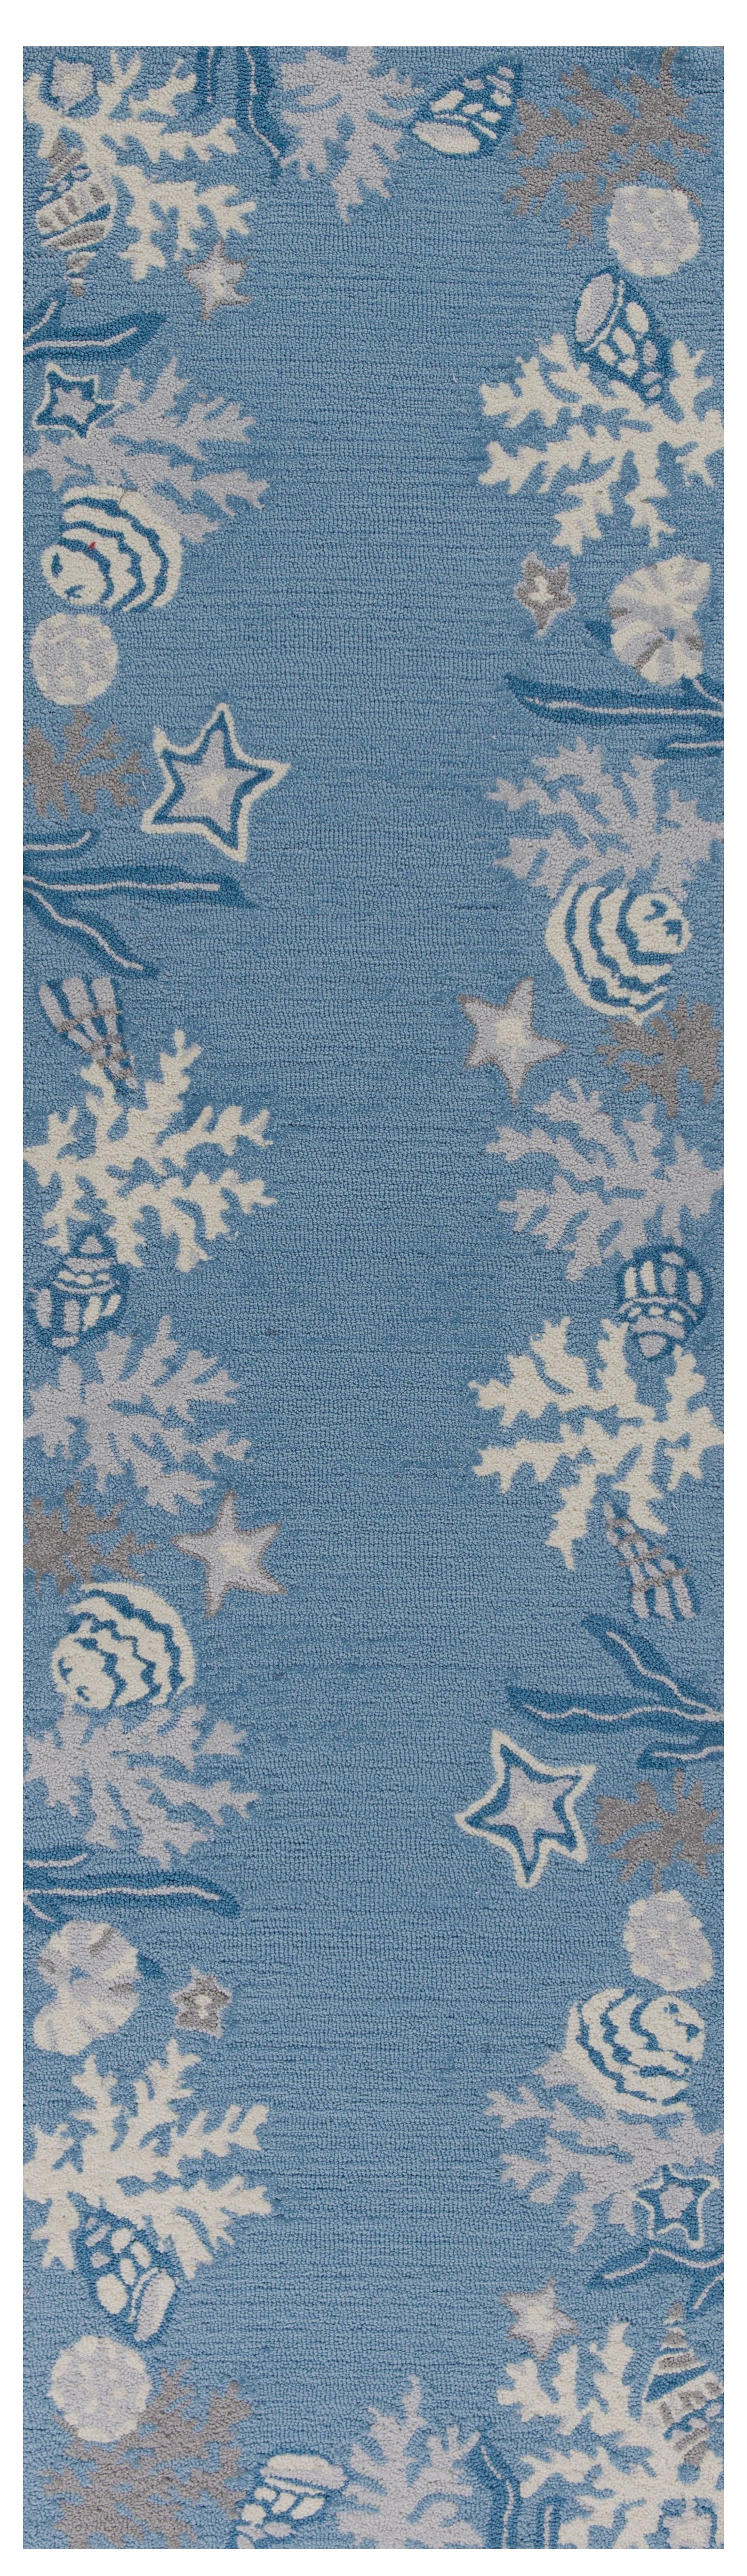 2' X 4' Light Blue Coral Hand Tufted Area Rug